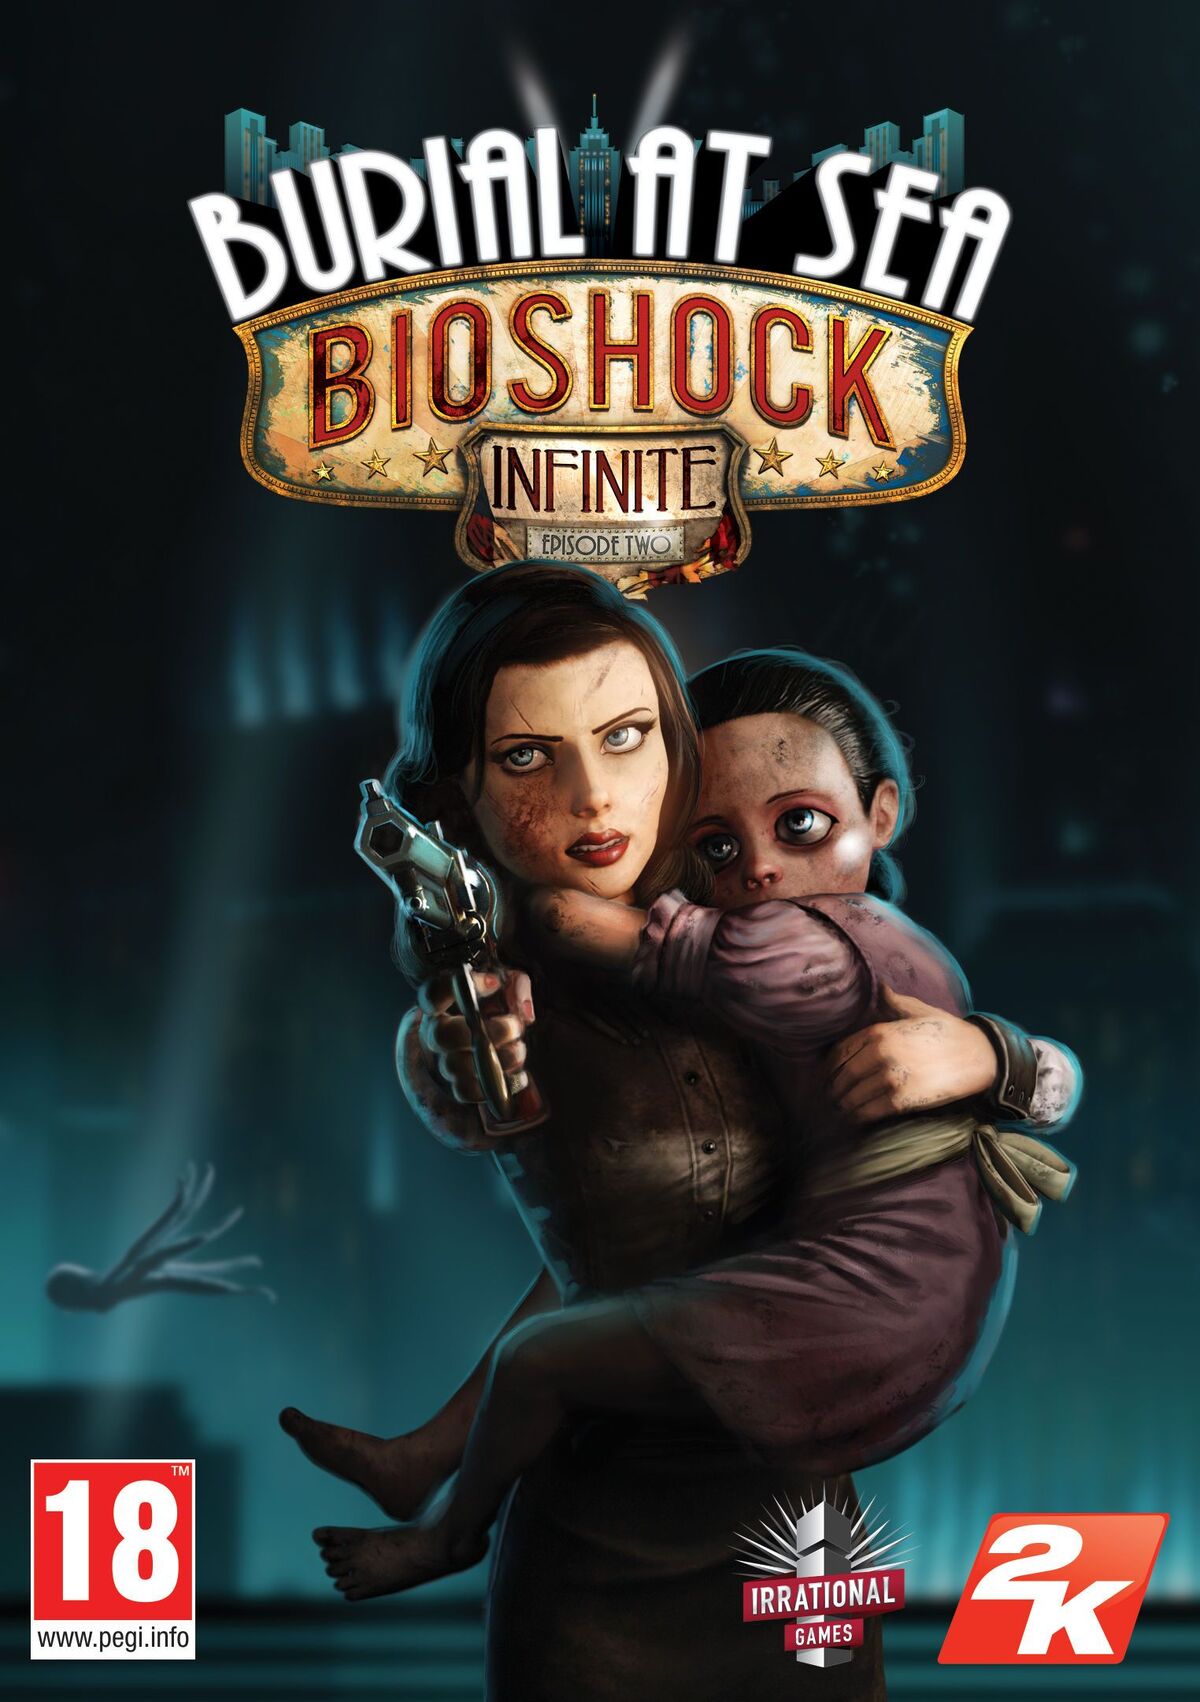 Deciphering the BioShock Infinite: Burial at Sea - Episode Two ending, why  it's perfect for BioShock - Neoseeker